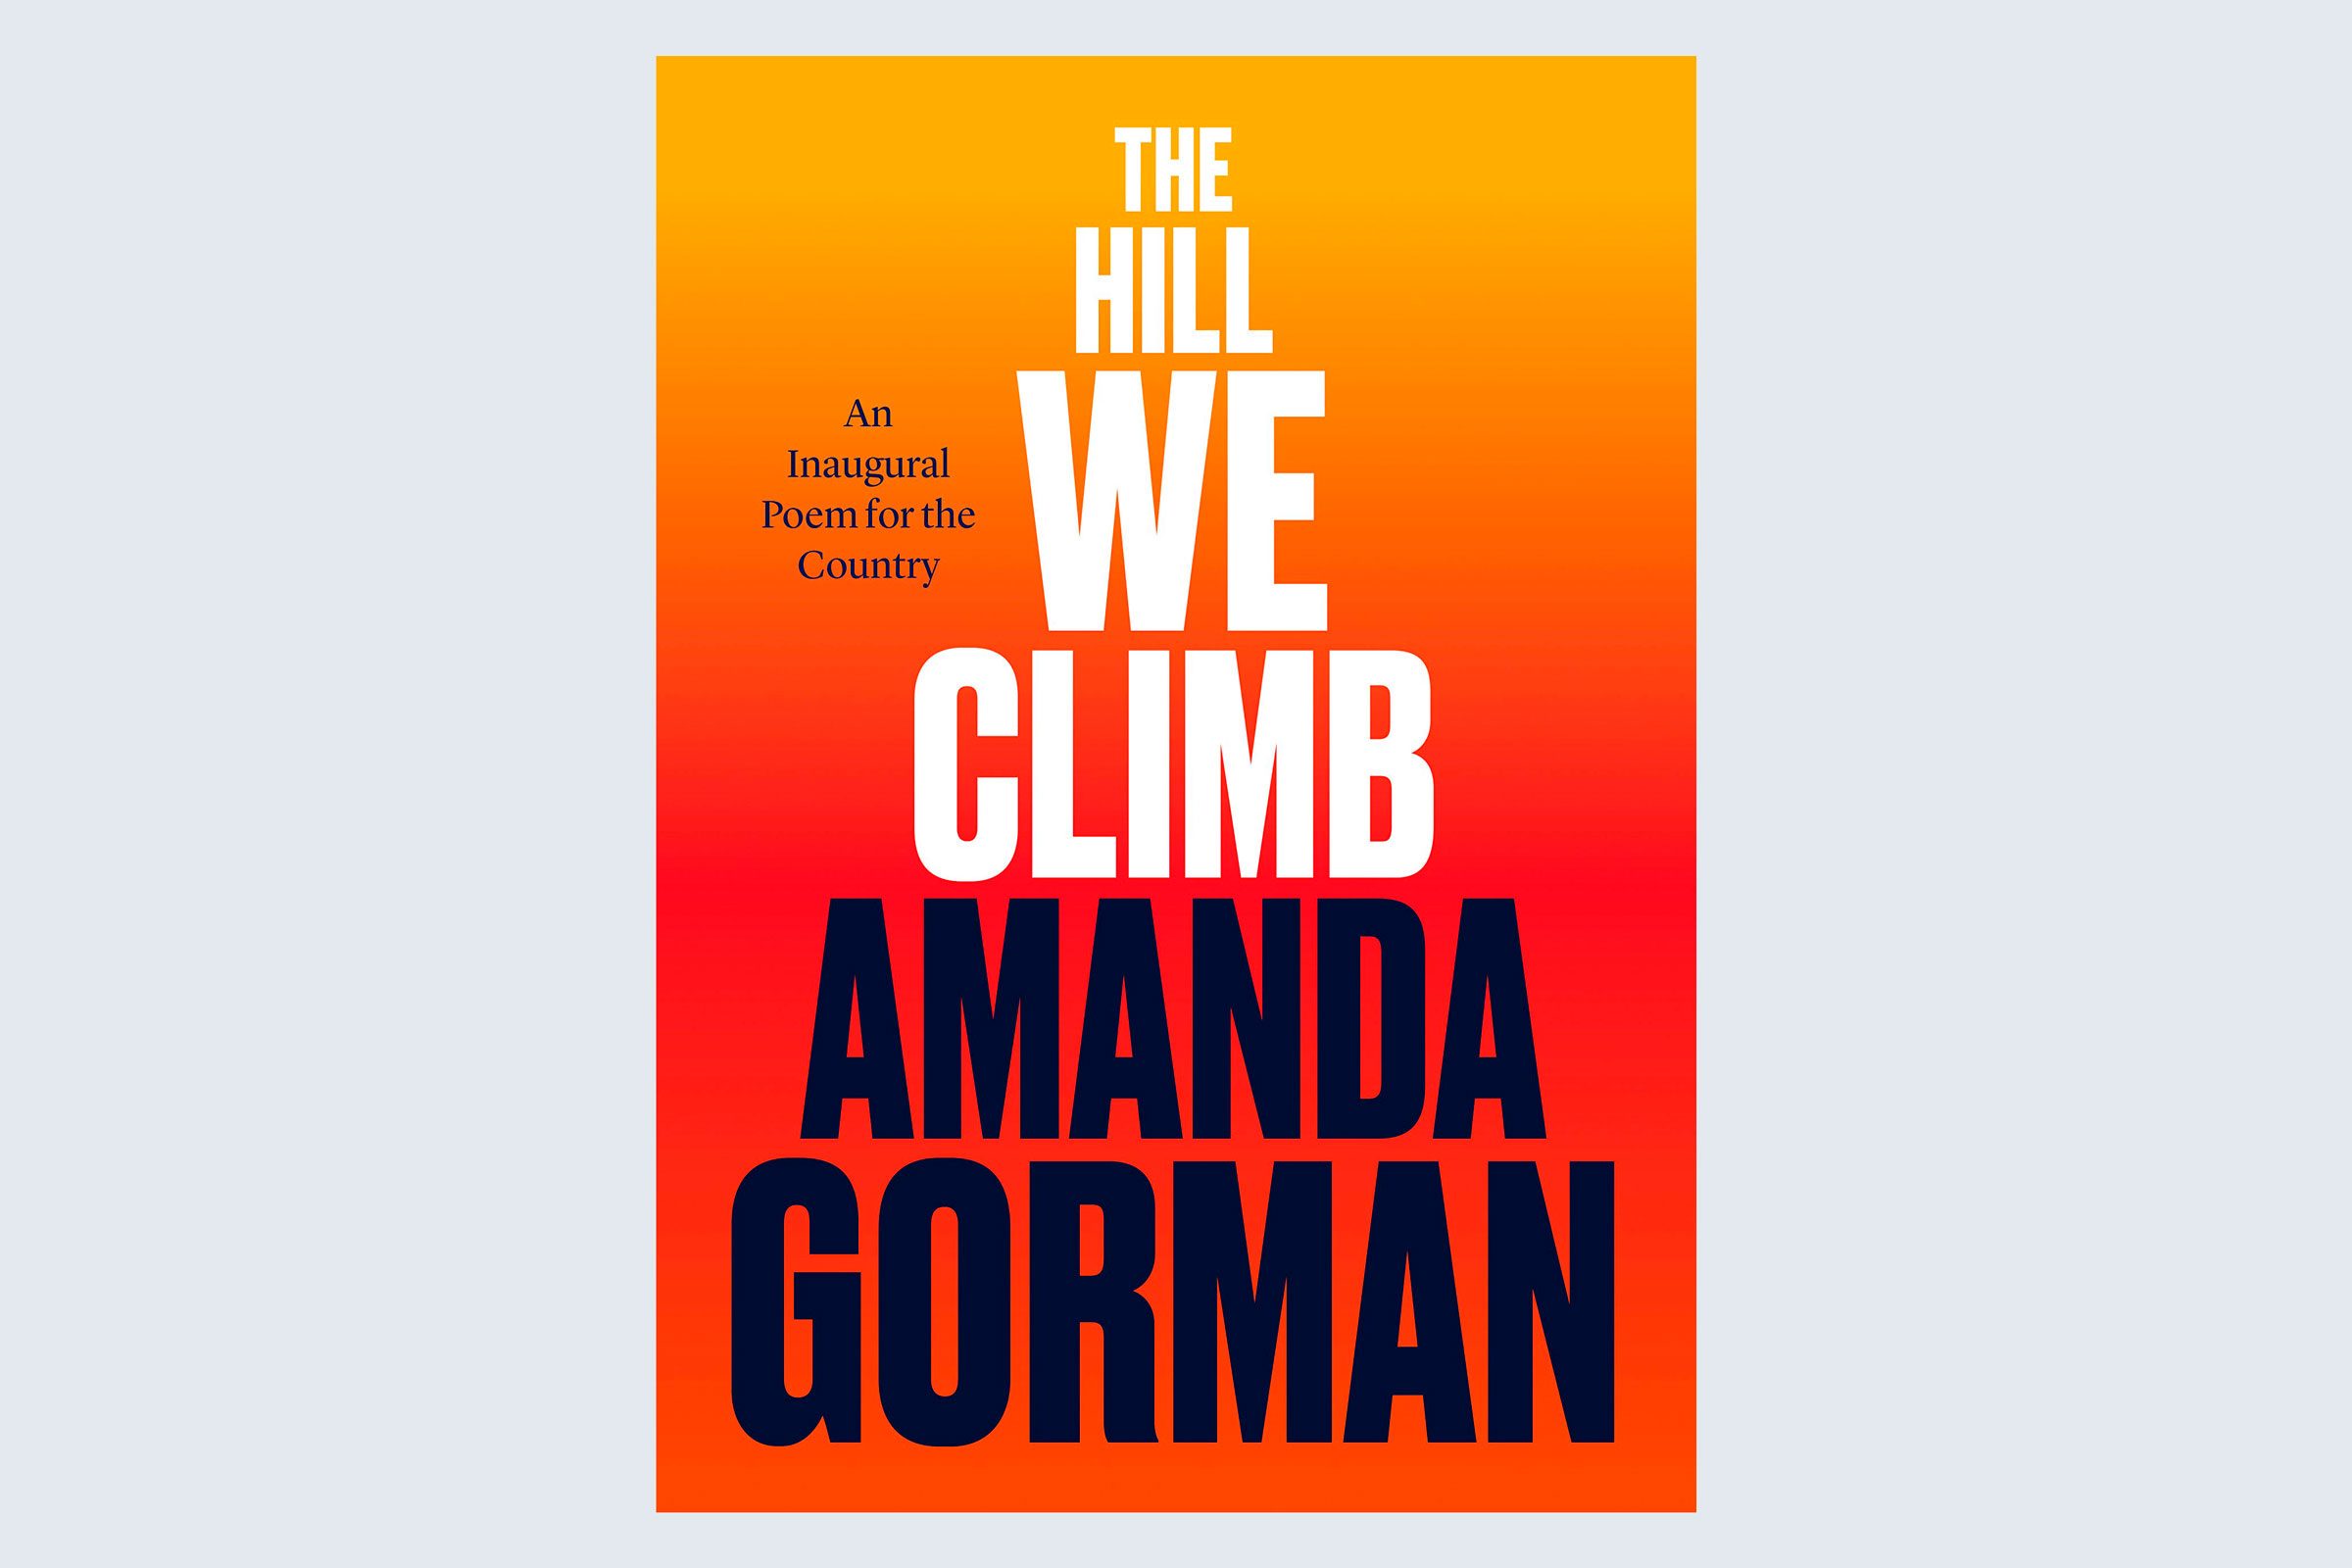 The Hill We Climb: An Inaugural Poem for the Country by Amanda Gorman